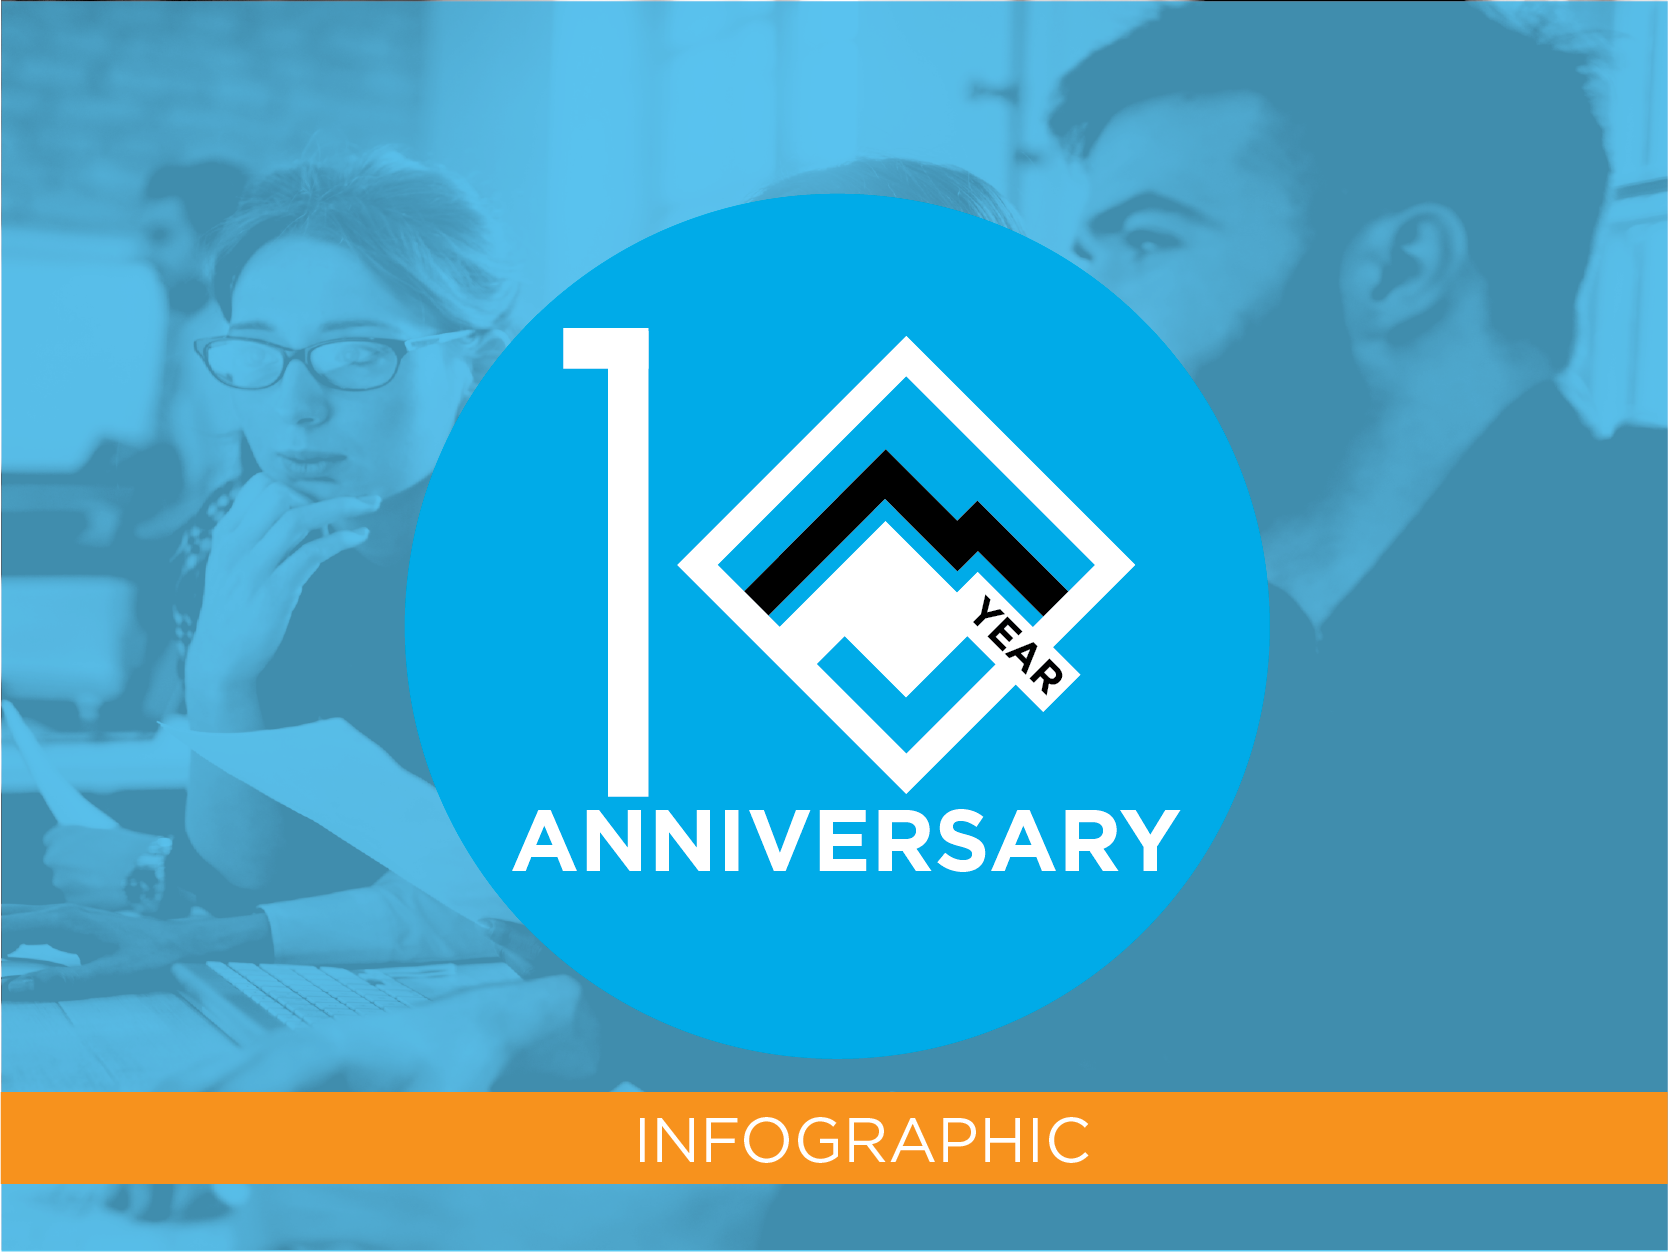 Celebrating 10 Years of Excellence in Real-Time Communications [infographic]